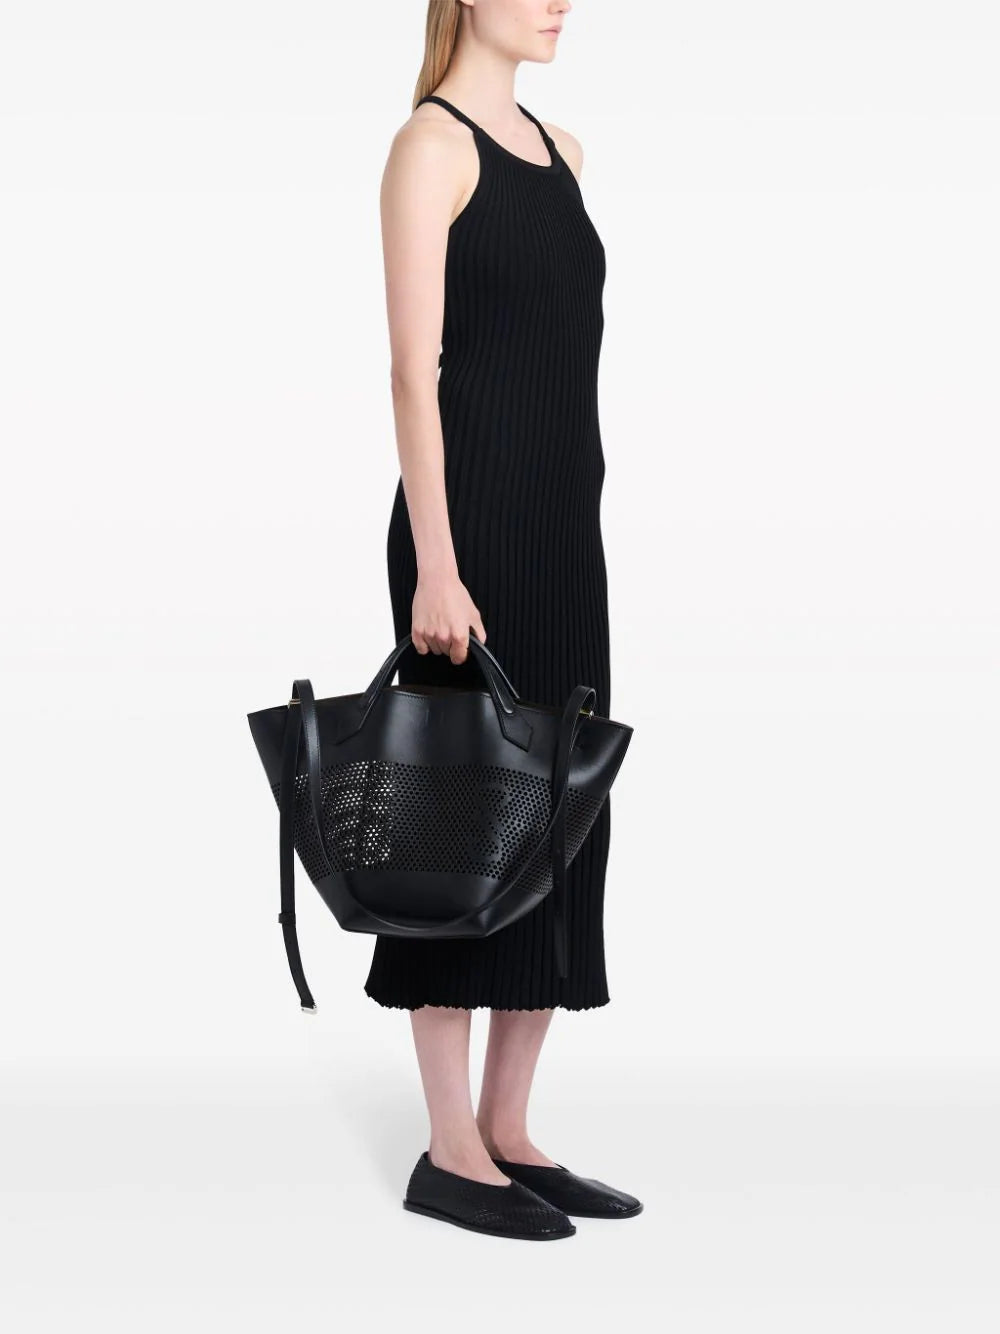 Large Chelsea Tote in Perforated Leather